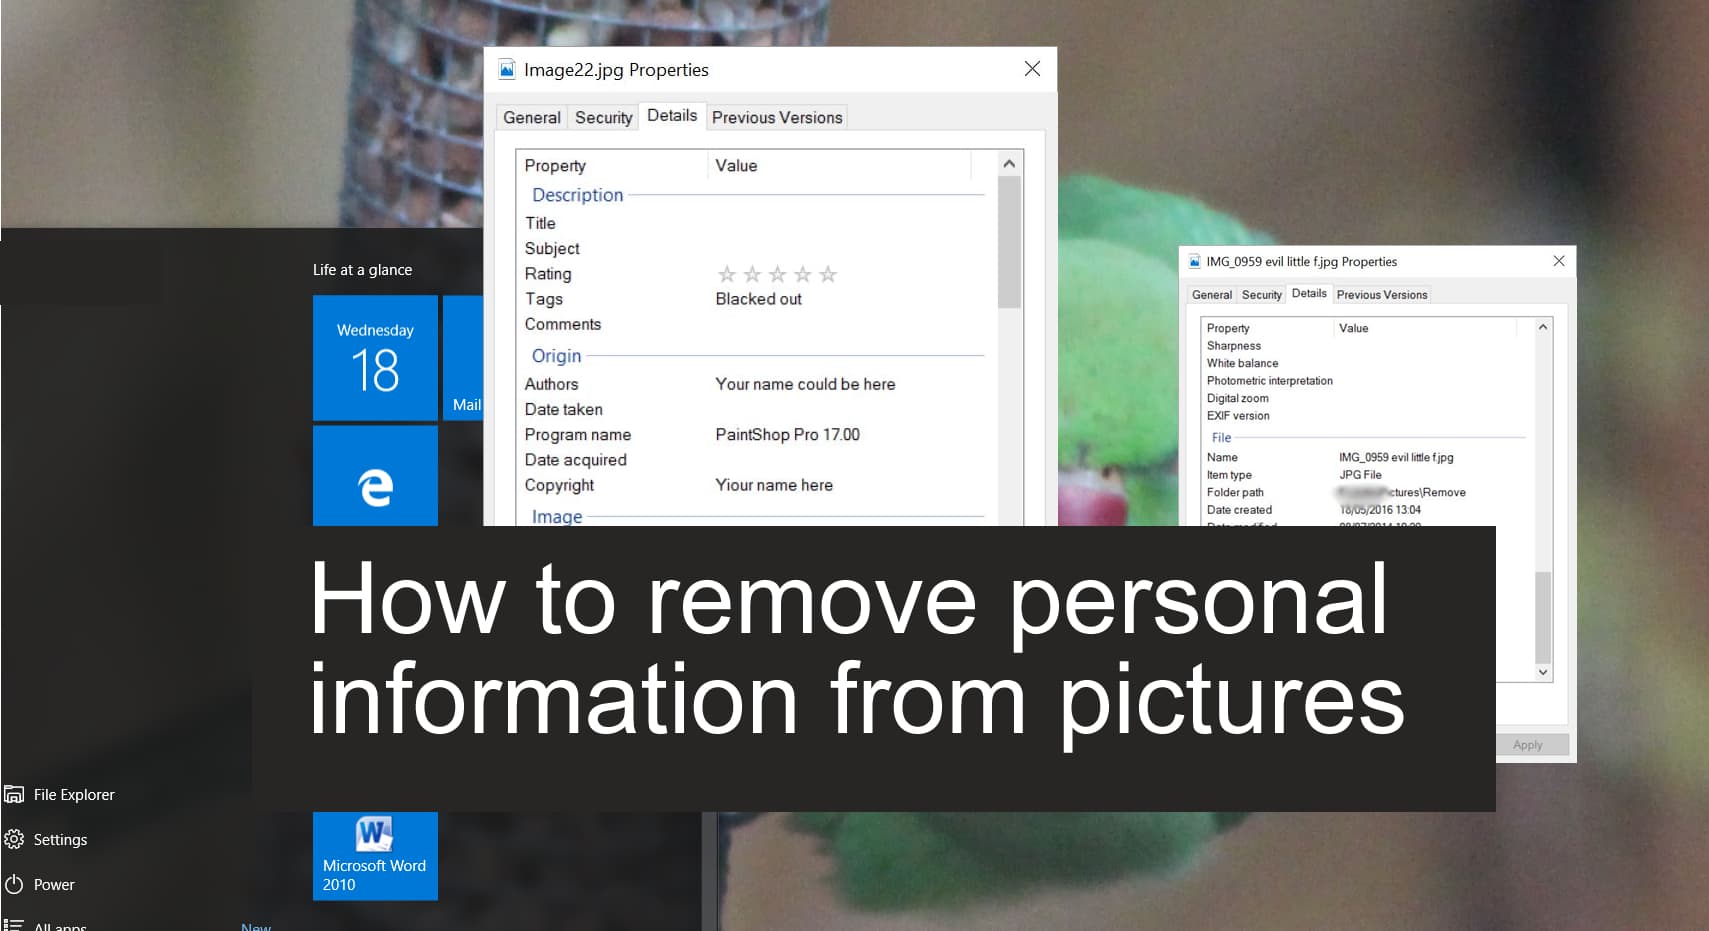 How to remove personal information from pictures